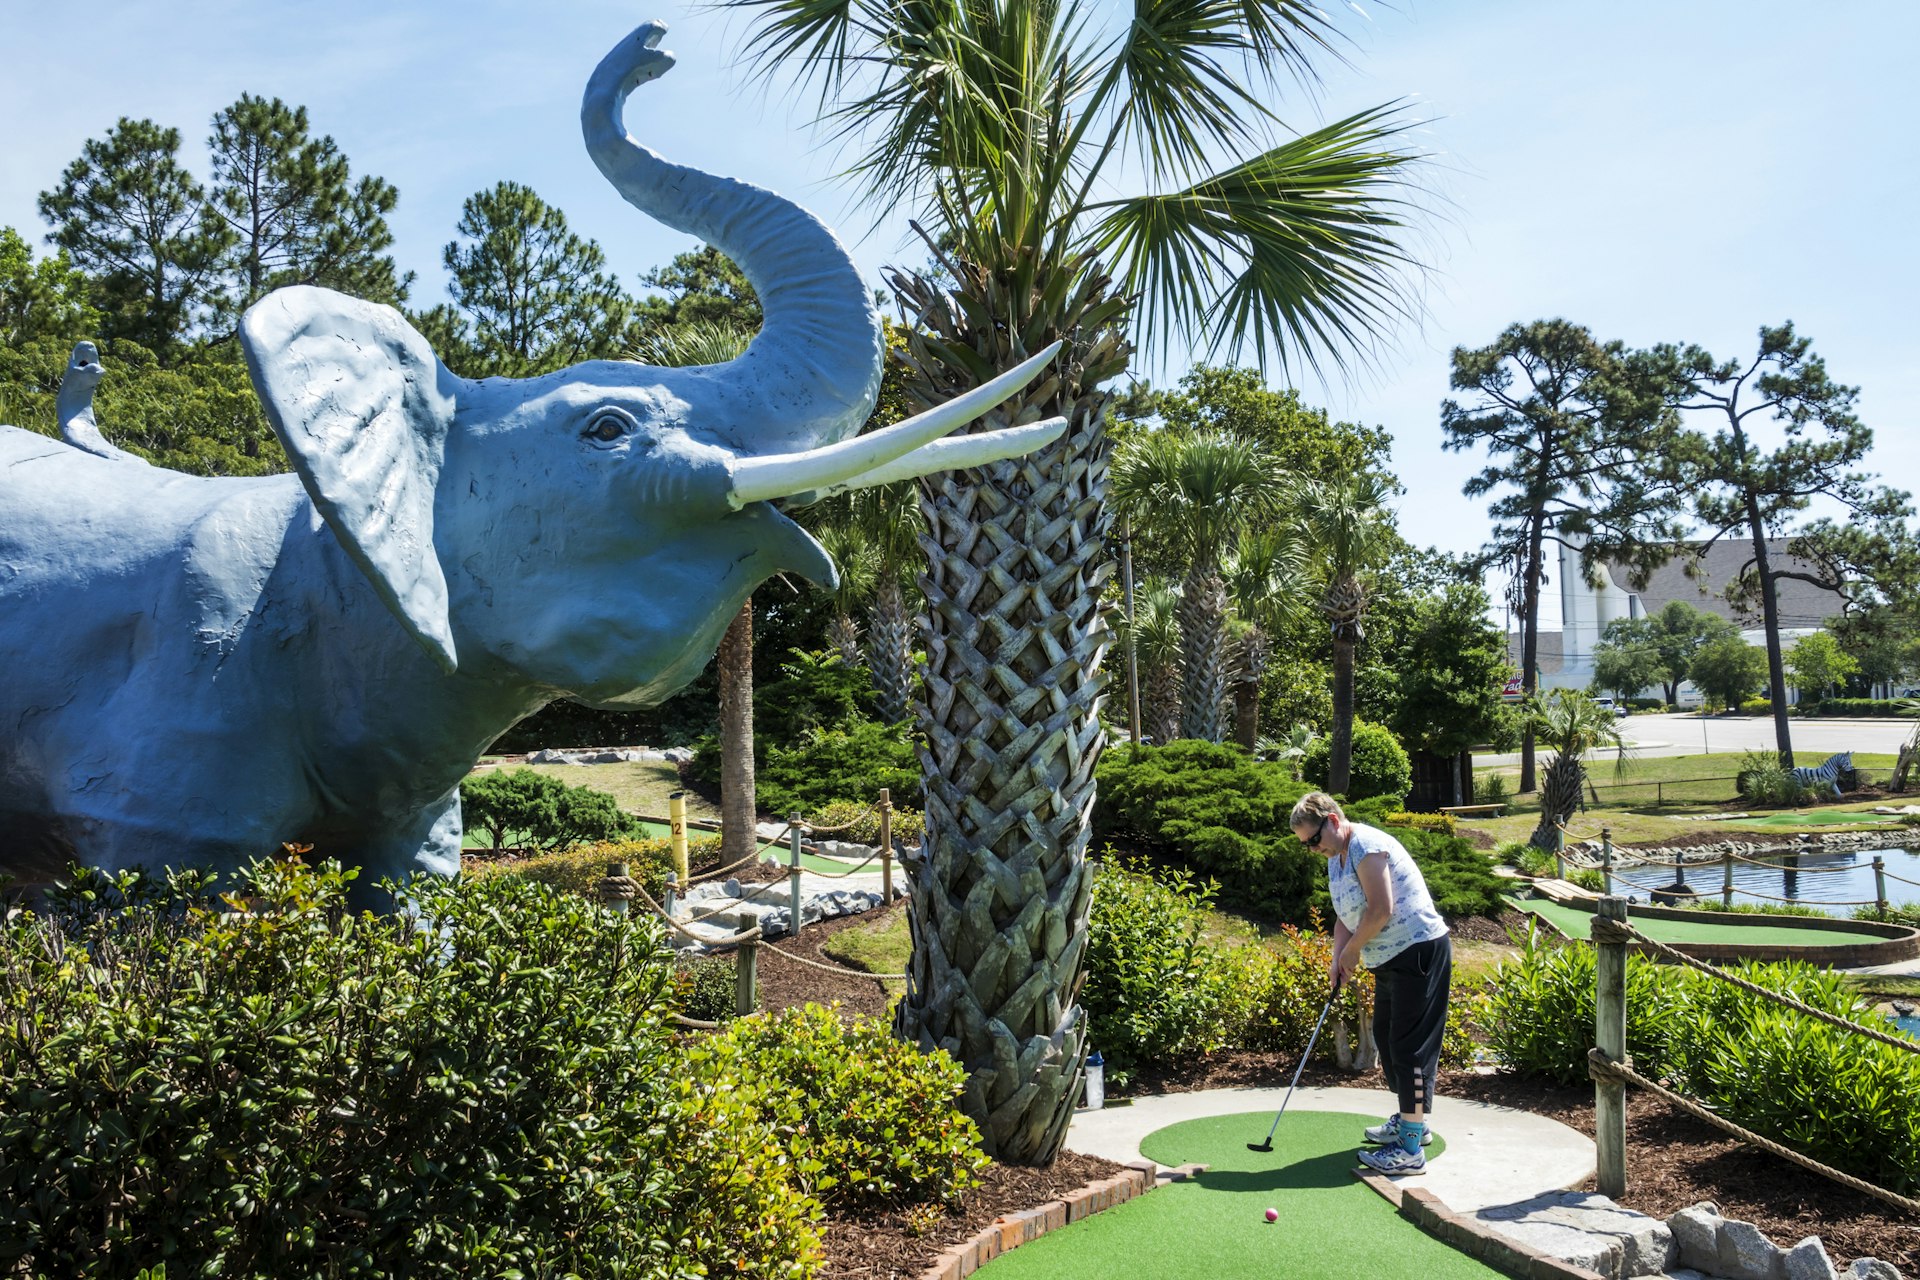 A woman puts at a mini-golf course next to a palm tree and fiberglass elephant in Myrtle Beach